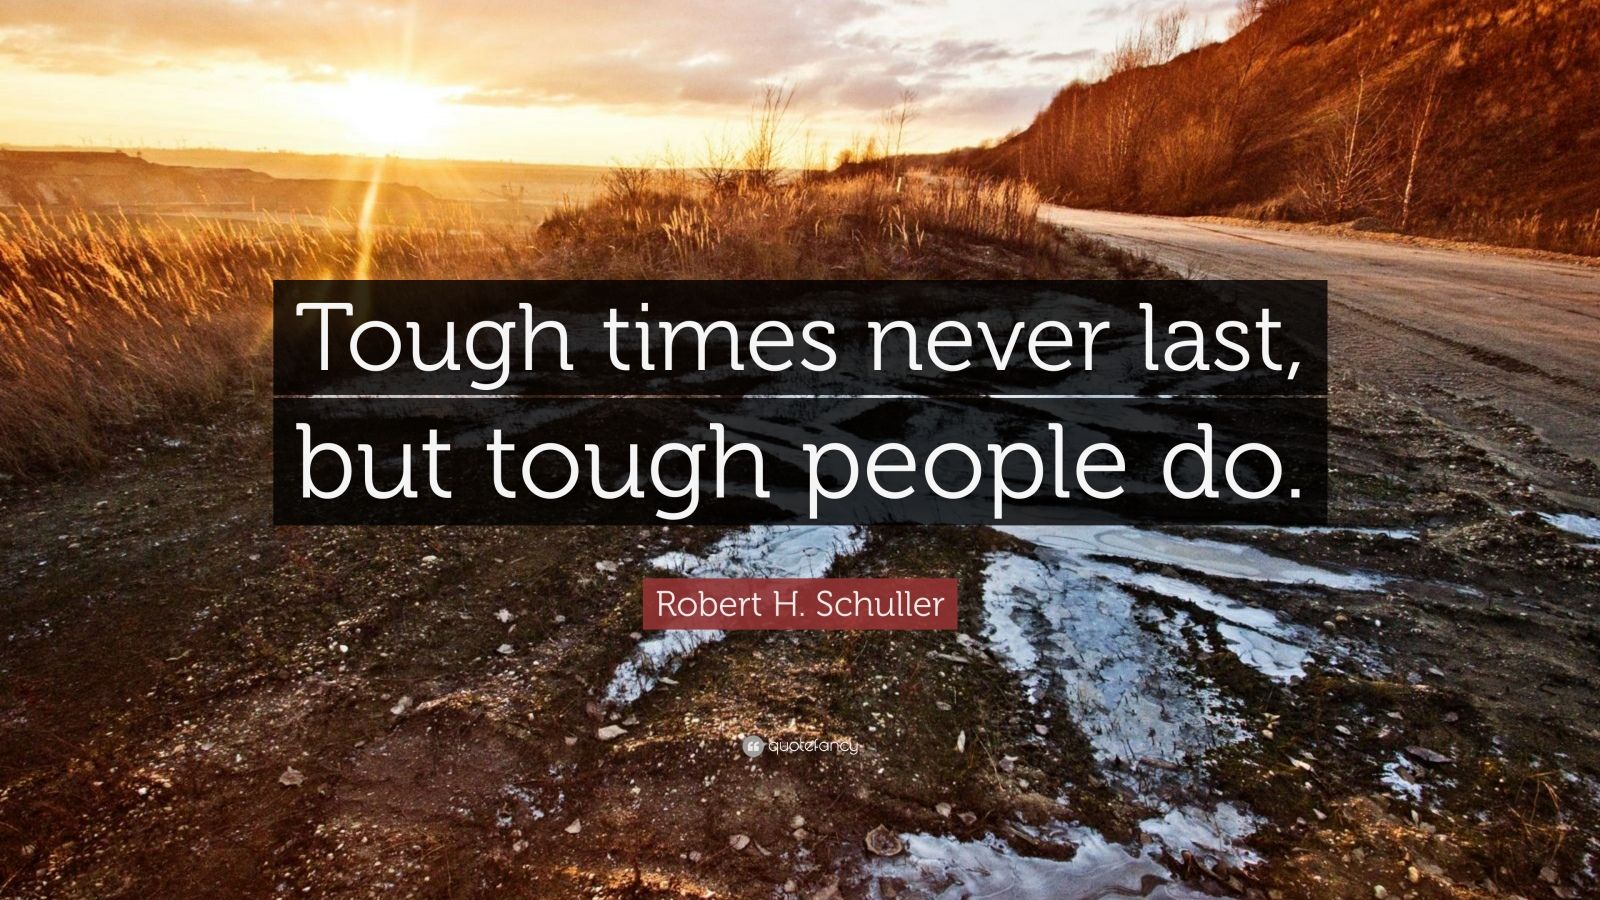 Robert H. Schuller Quote: “Tough times never last, but tough people do ...